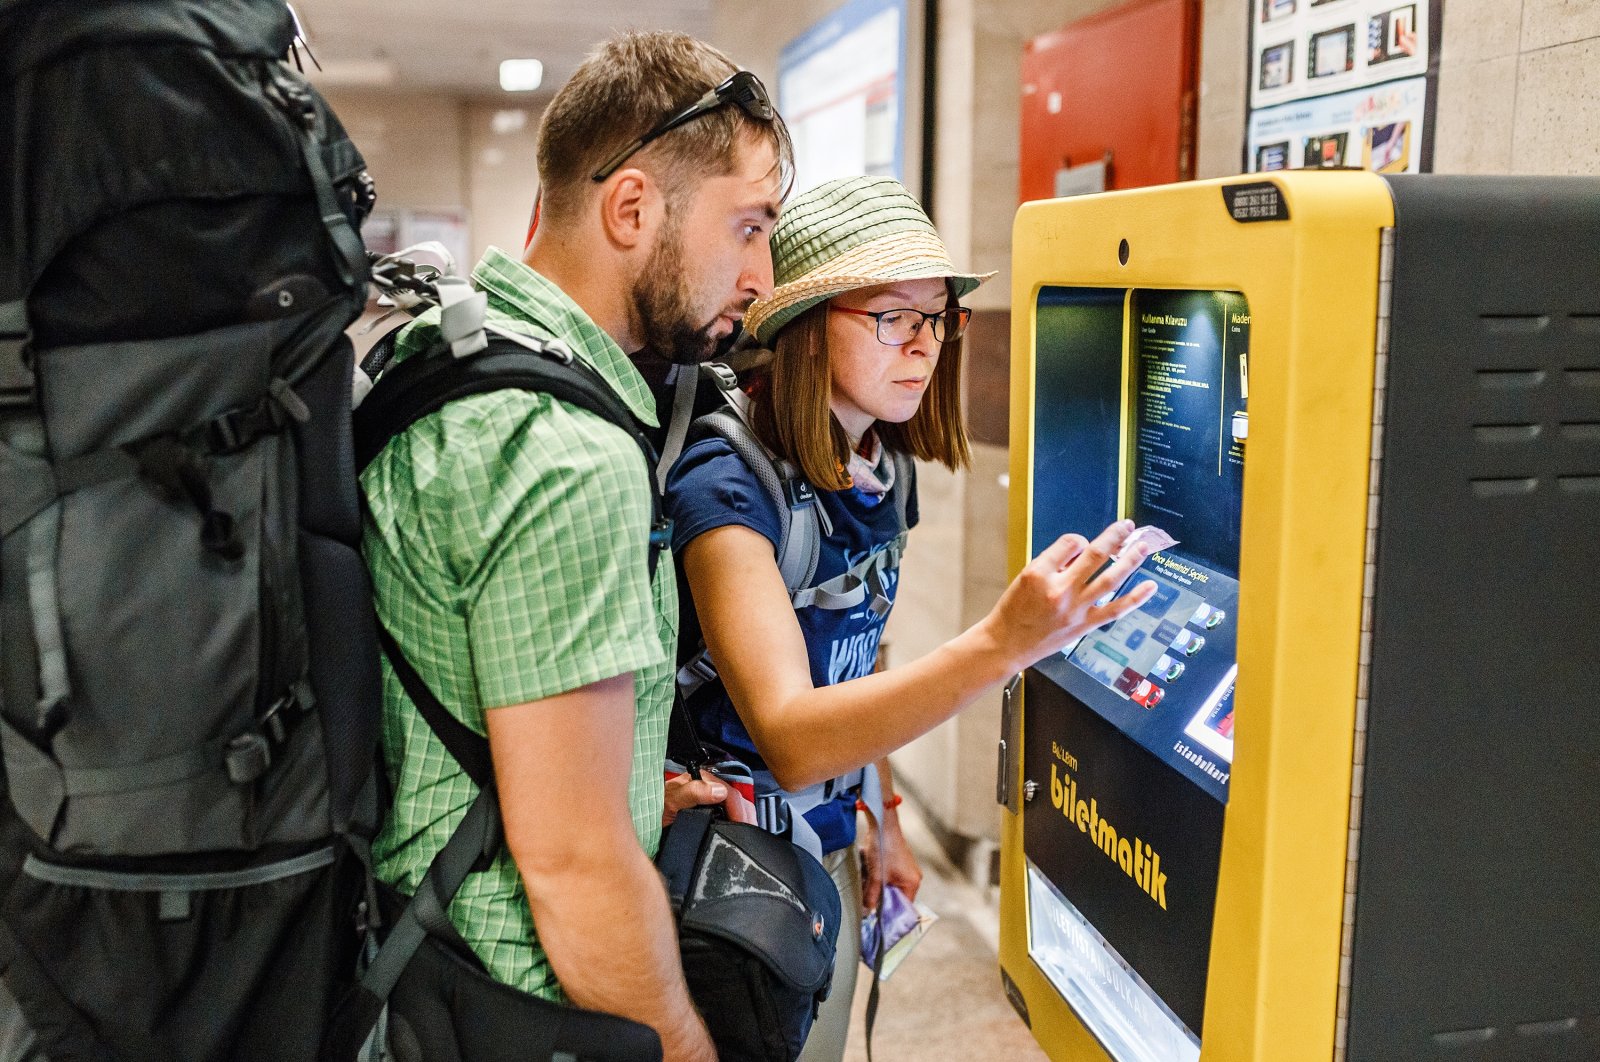 Tourists purchase an Istanbulkart from a vending machine, in Istanbul, Türkiye, Sept. 10, 2017. (Shutterstock Photo)